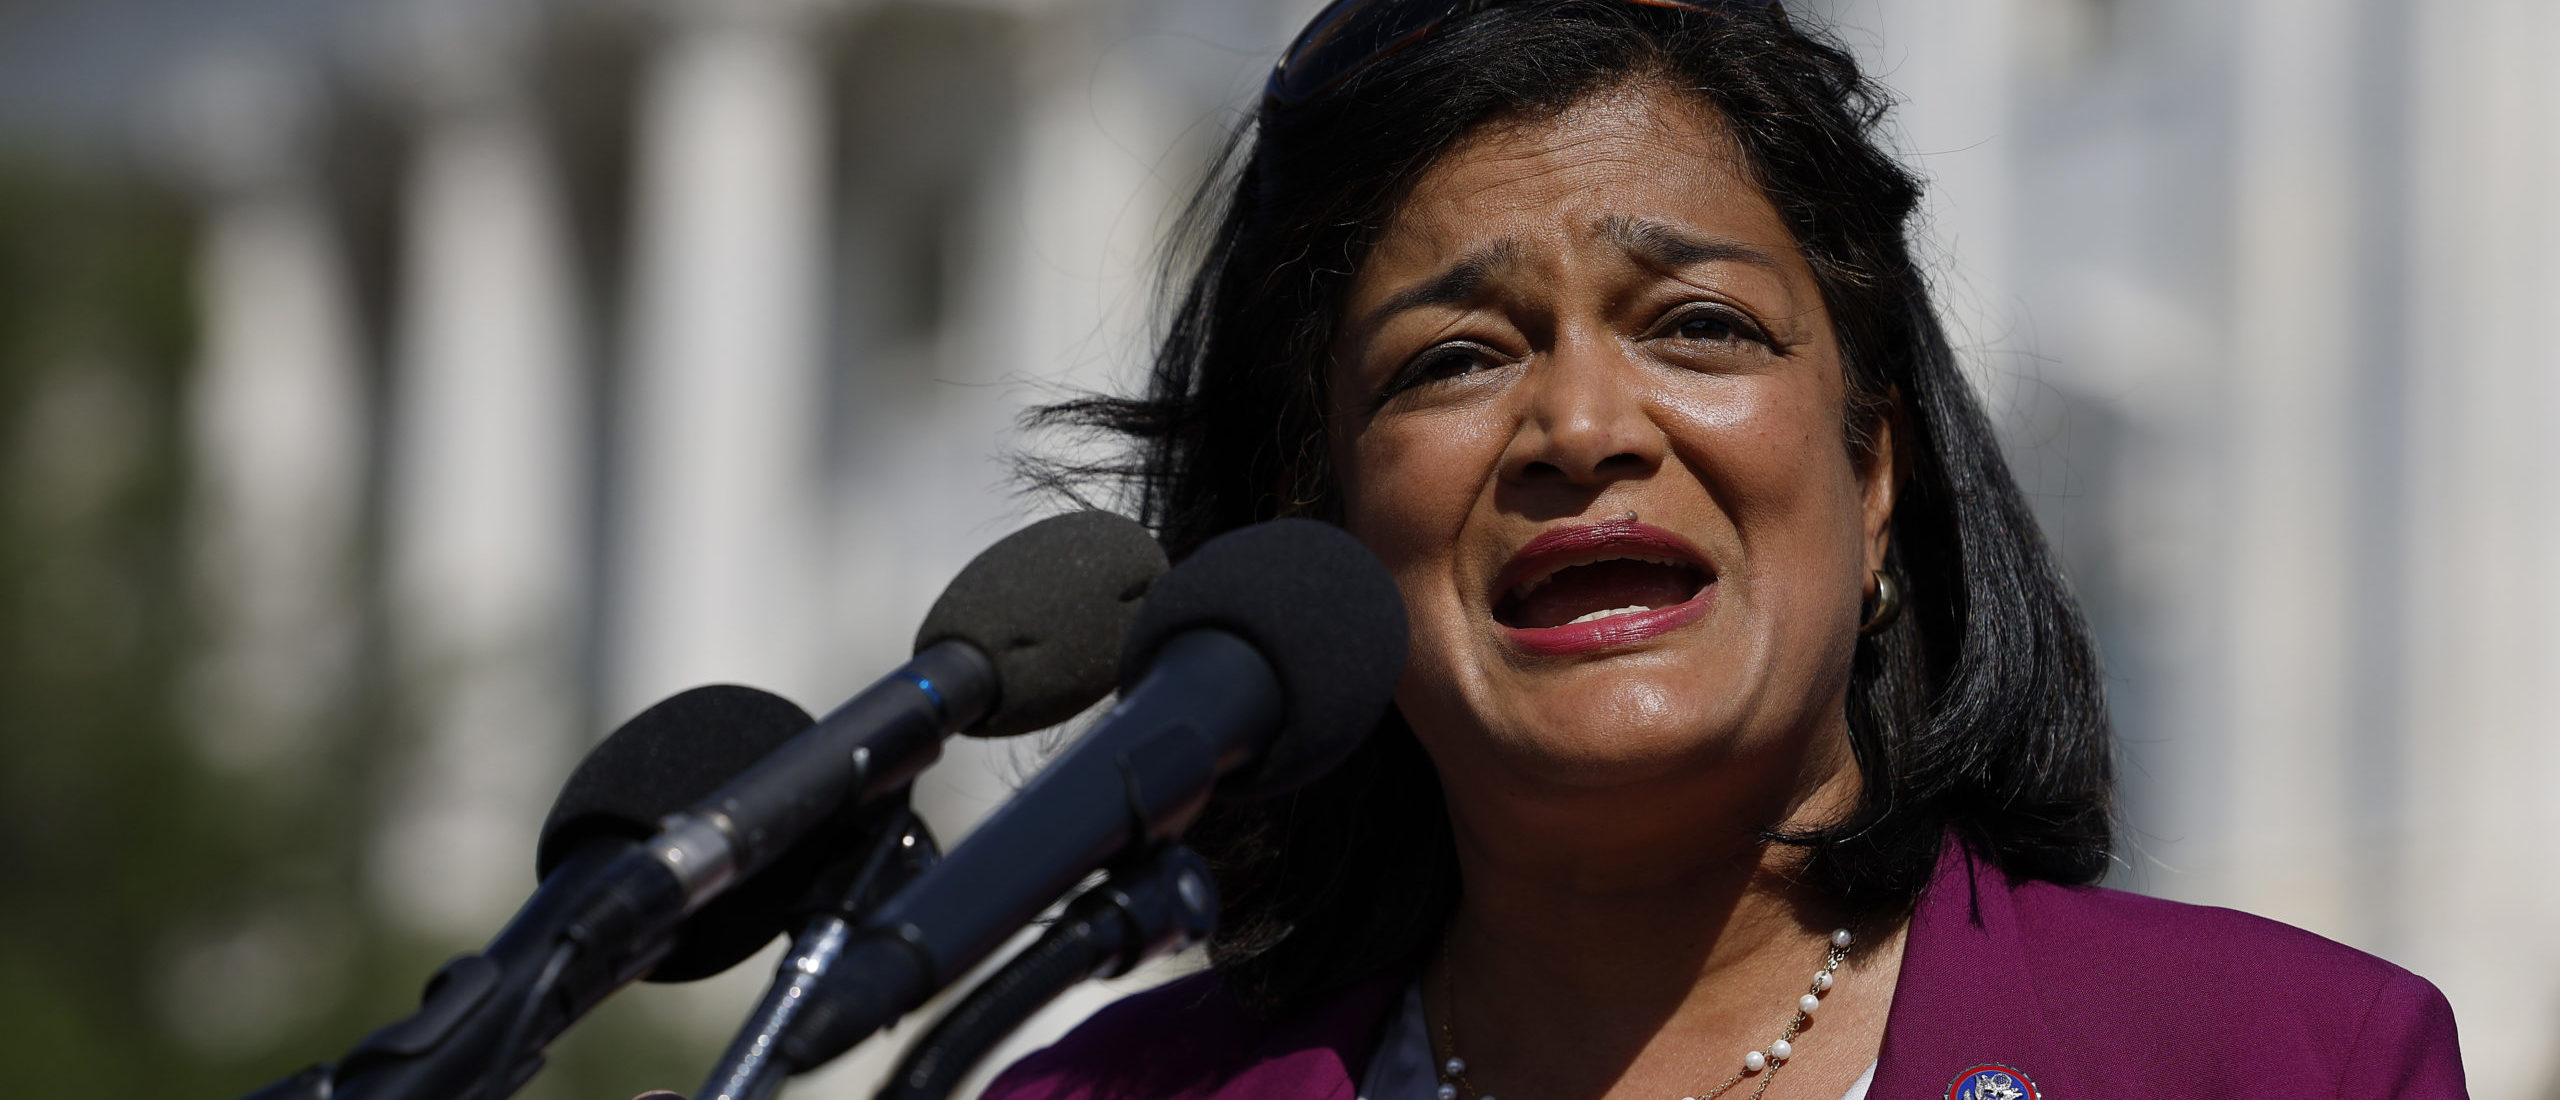 Rep. Pramila Jayapal (D-WA) and fellow members of the House Progressive Caucus hold a news conference ahead of the vote on the Inflation Reduction Act of 2022.